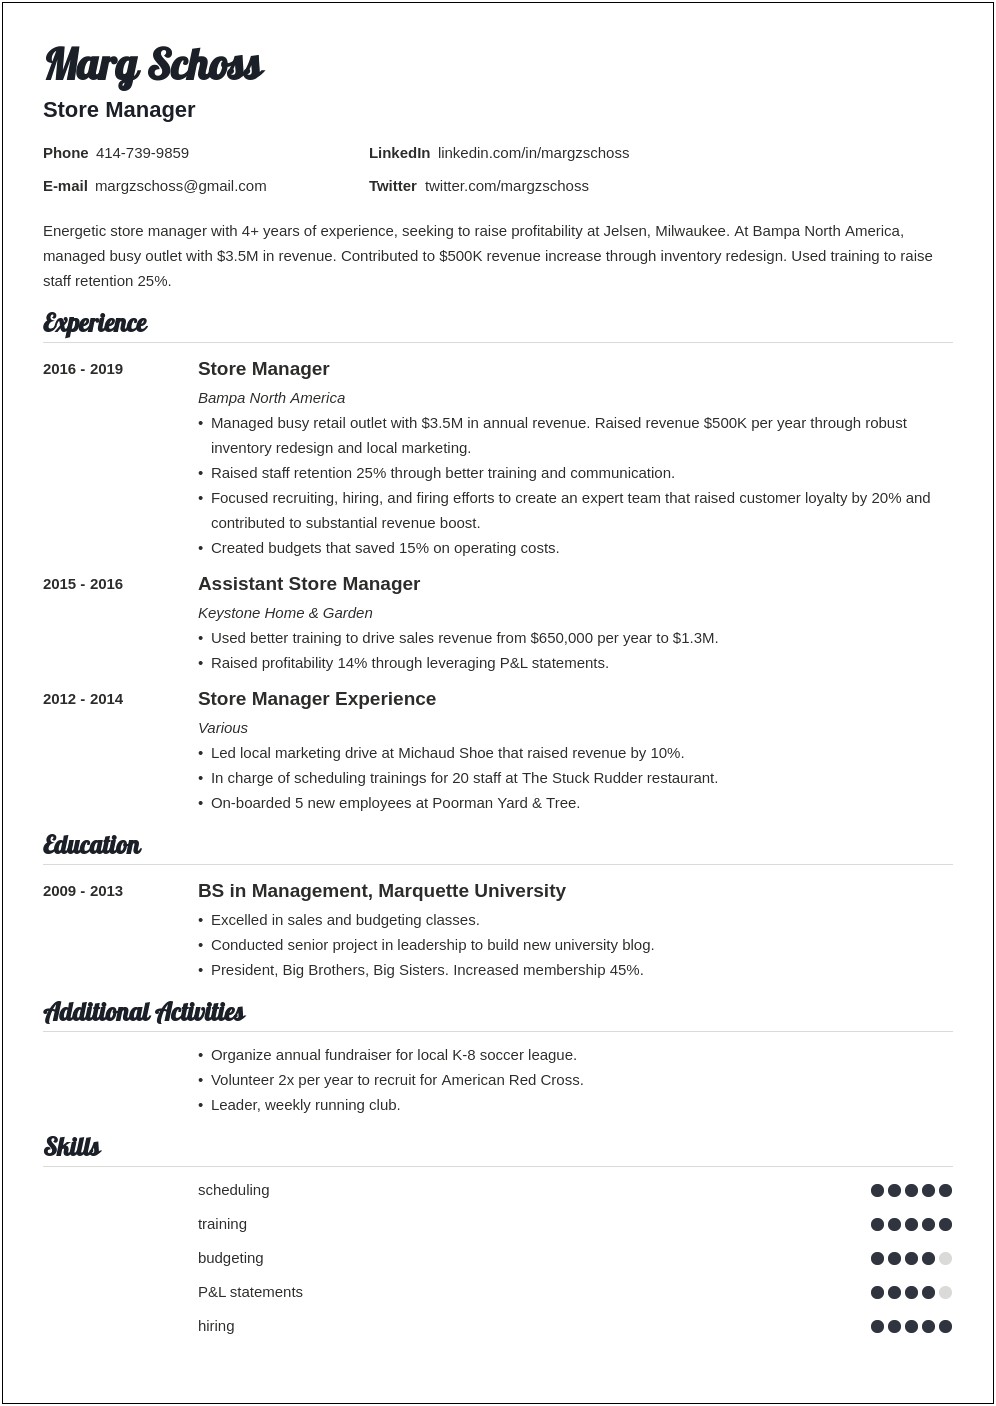 Career Objective For Resume For Retail Manager